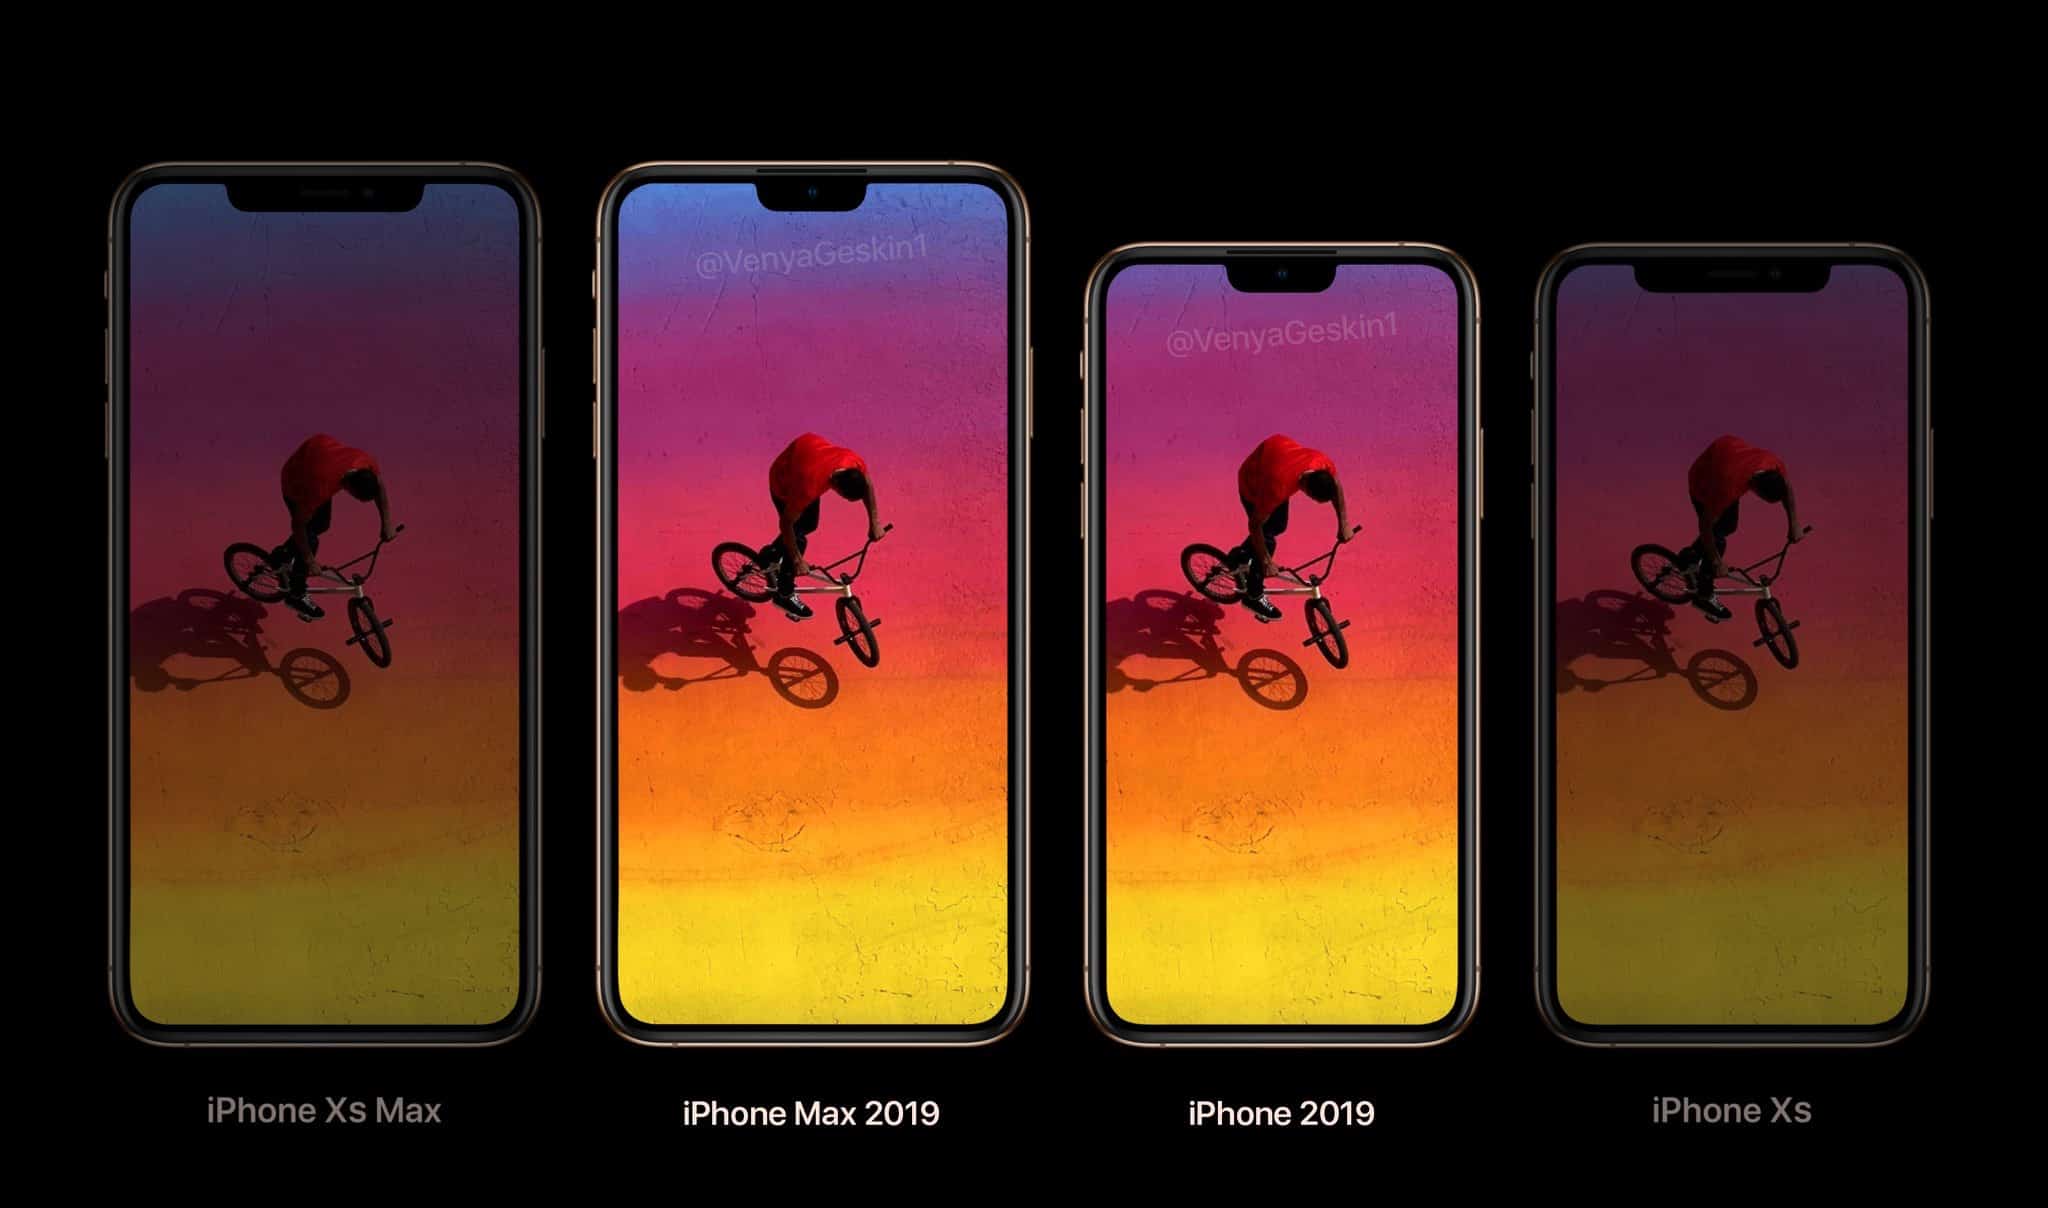 Can you spot the change in the 2019 iPhone models?